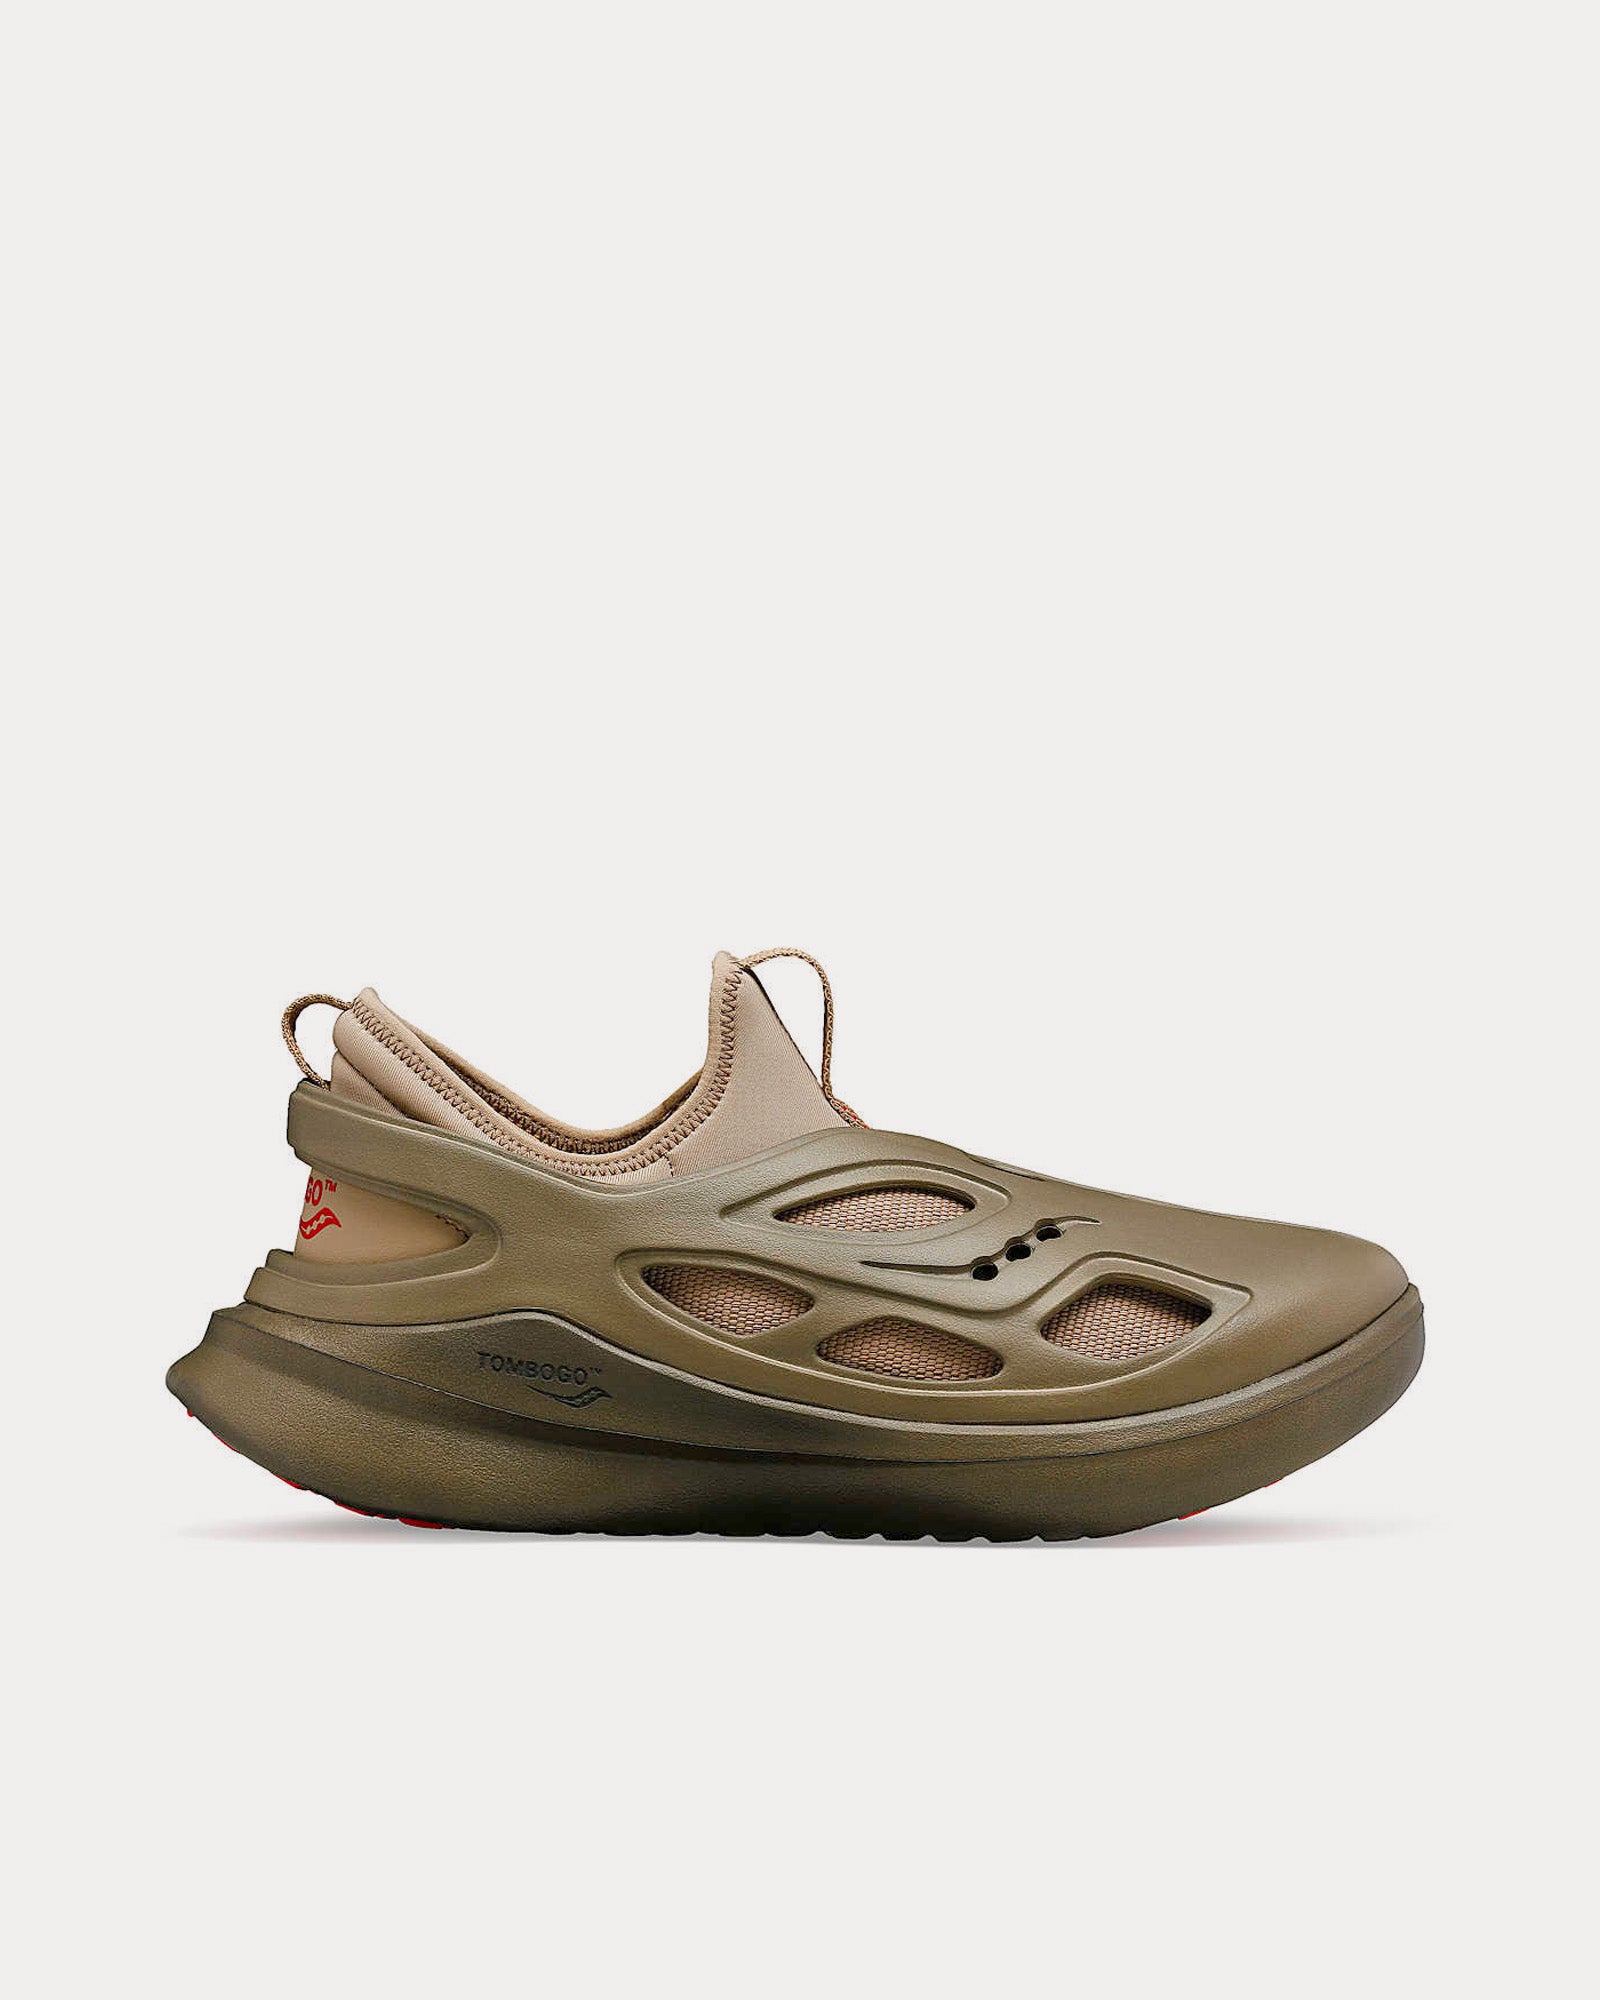 Saucony x Tombogo - Butterfly Brown Slip On Sneakers